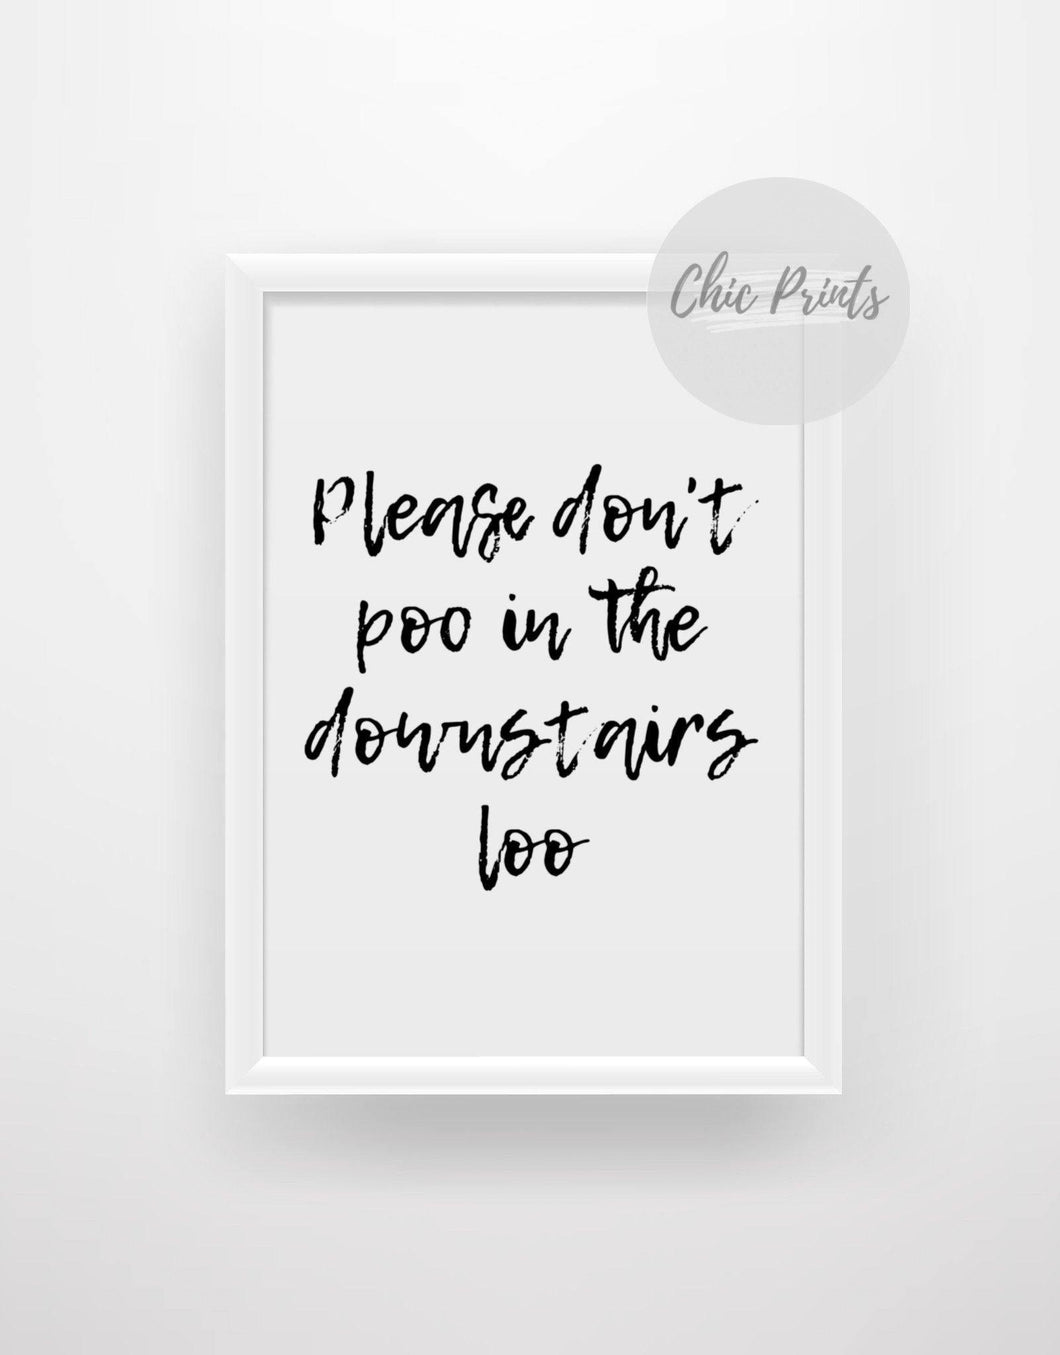 Please don’t poo in the downstairs loo print - Chic Prints